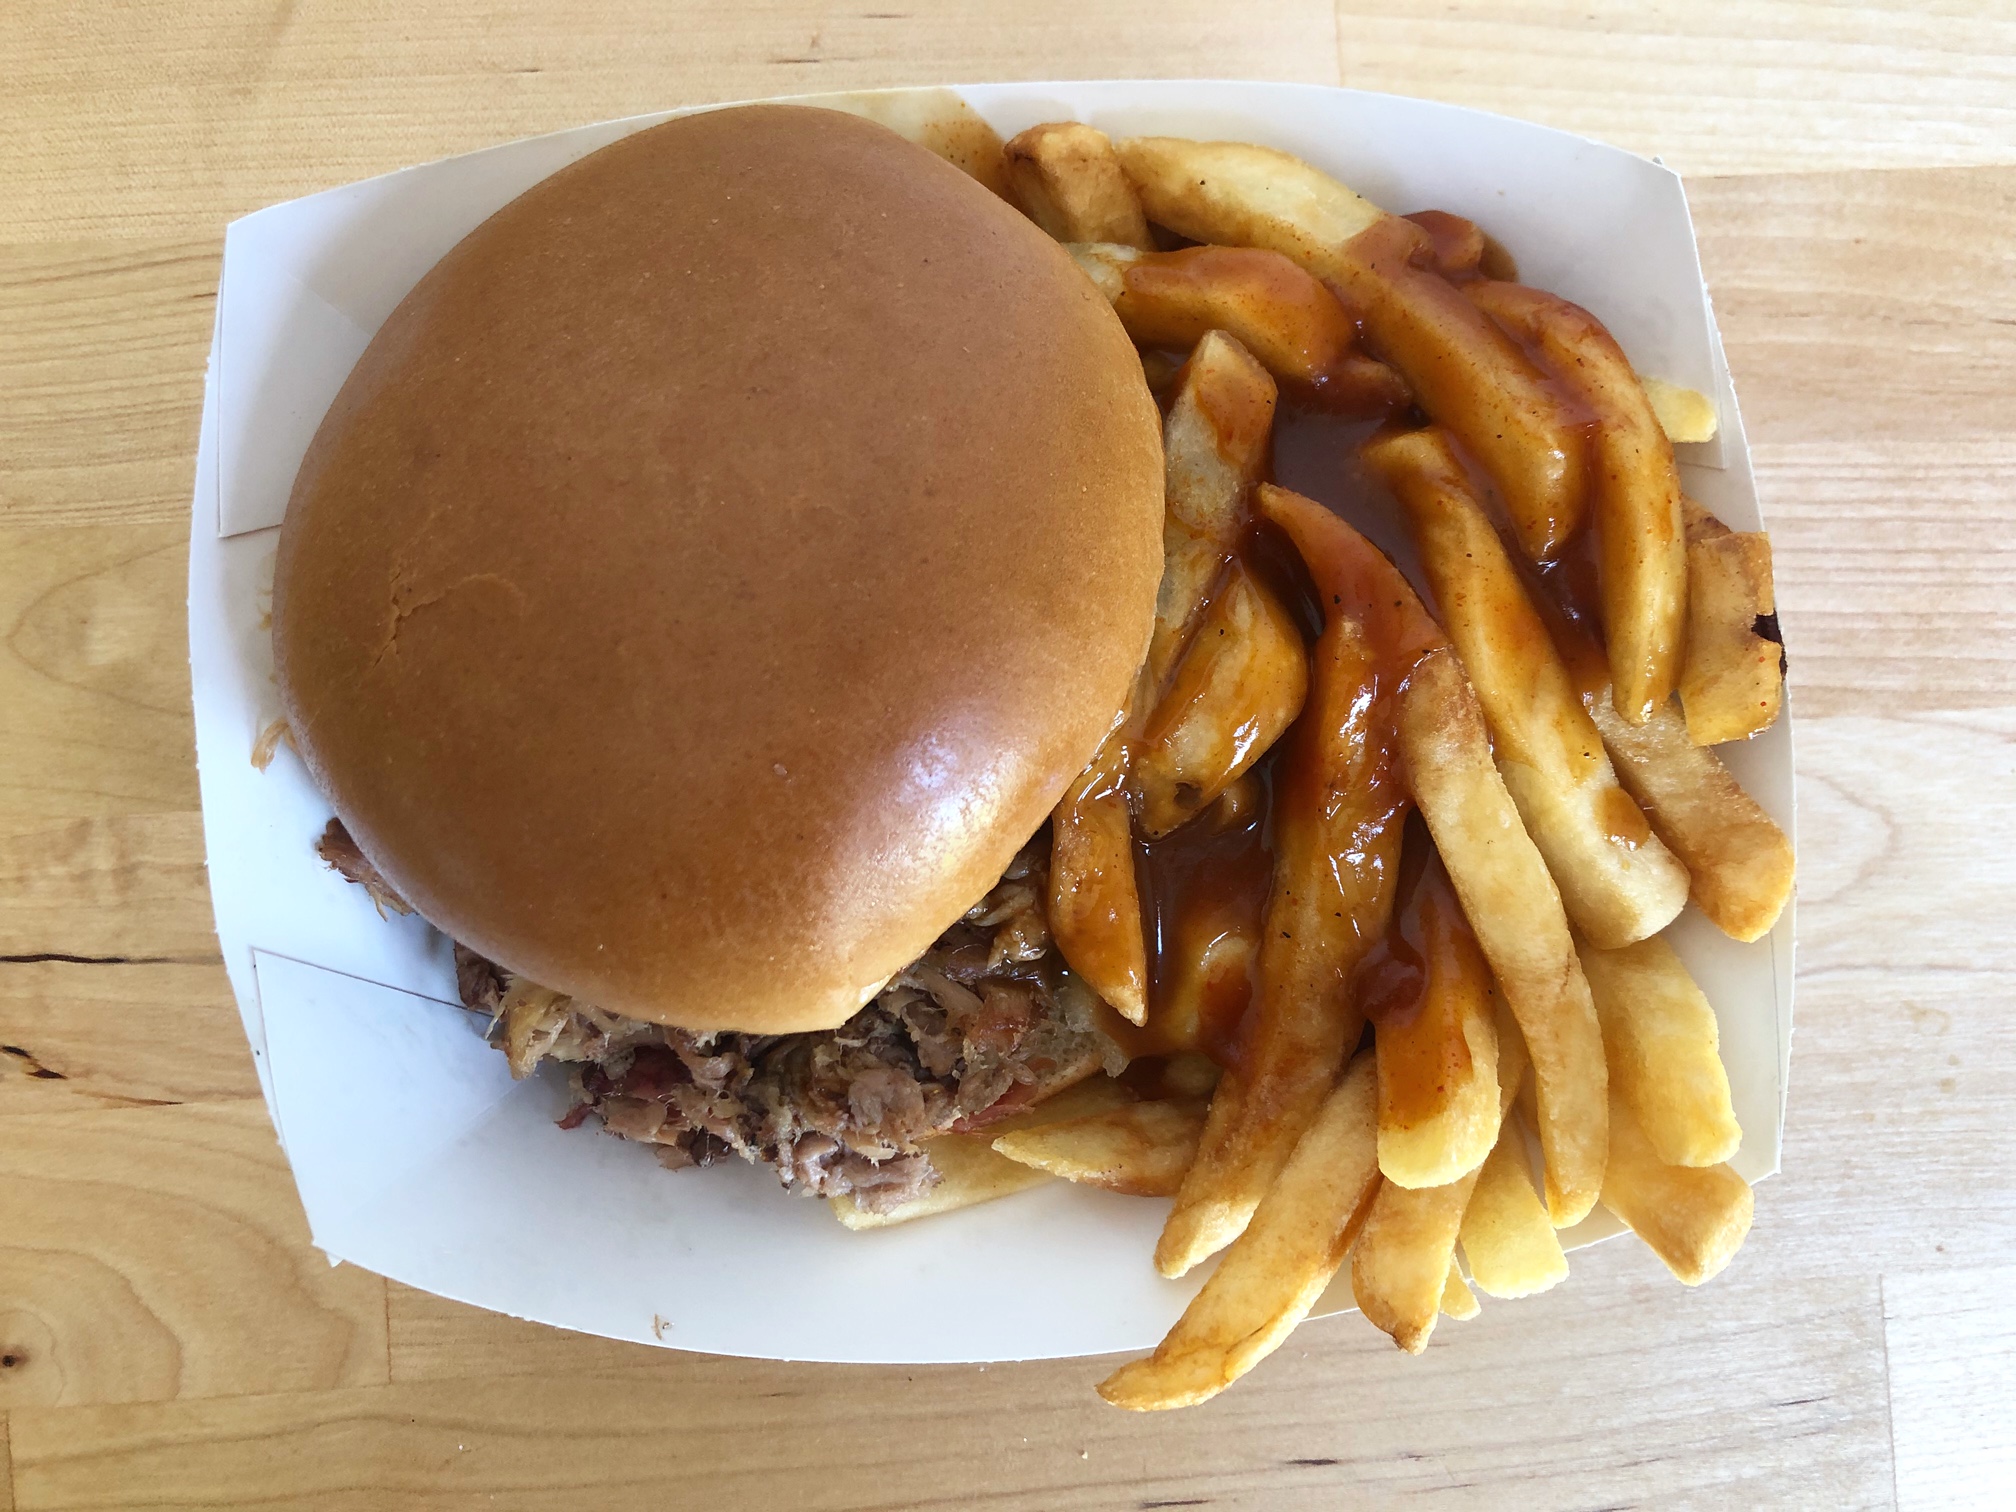 From above, a pulled pork sandwich in a perfect bun sits in a white paper boat with fries and a thick drizzle of barbeque sauce. Photo by Alyssa Buckley.